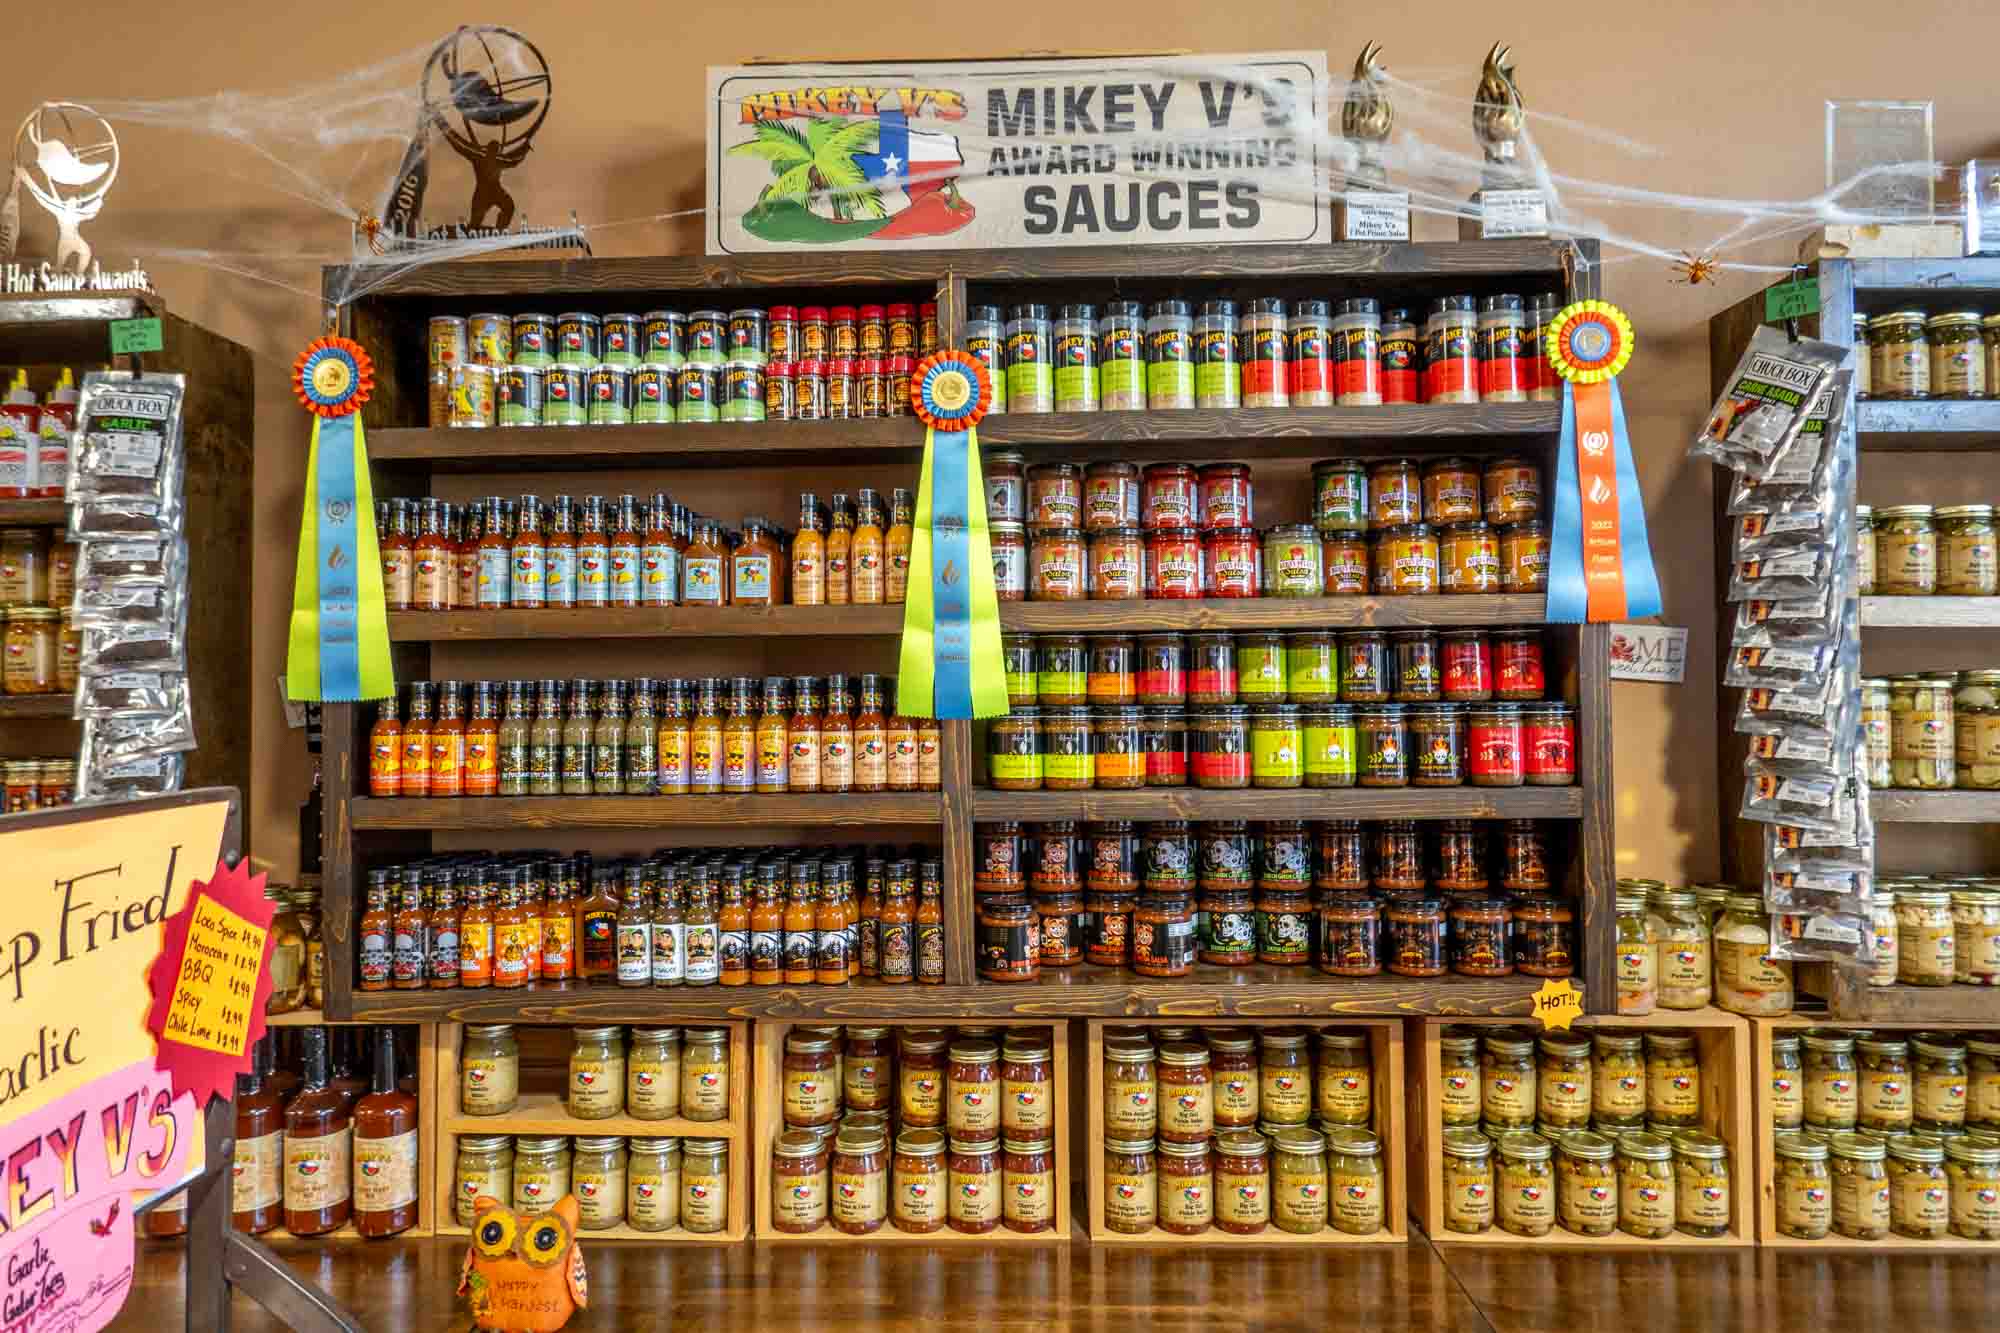 Shelves filled with bottles of hot sauce and a sign: "Mikey V's Award-Winning Sauces"